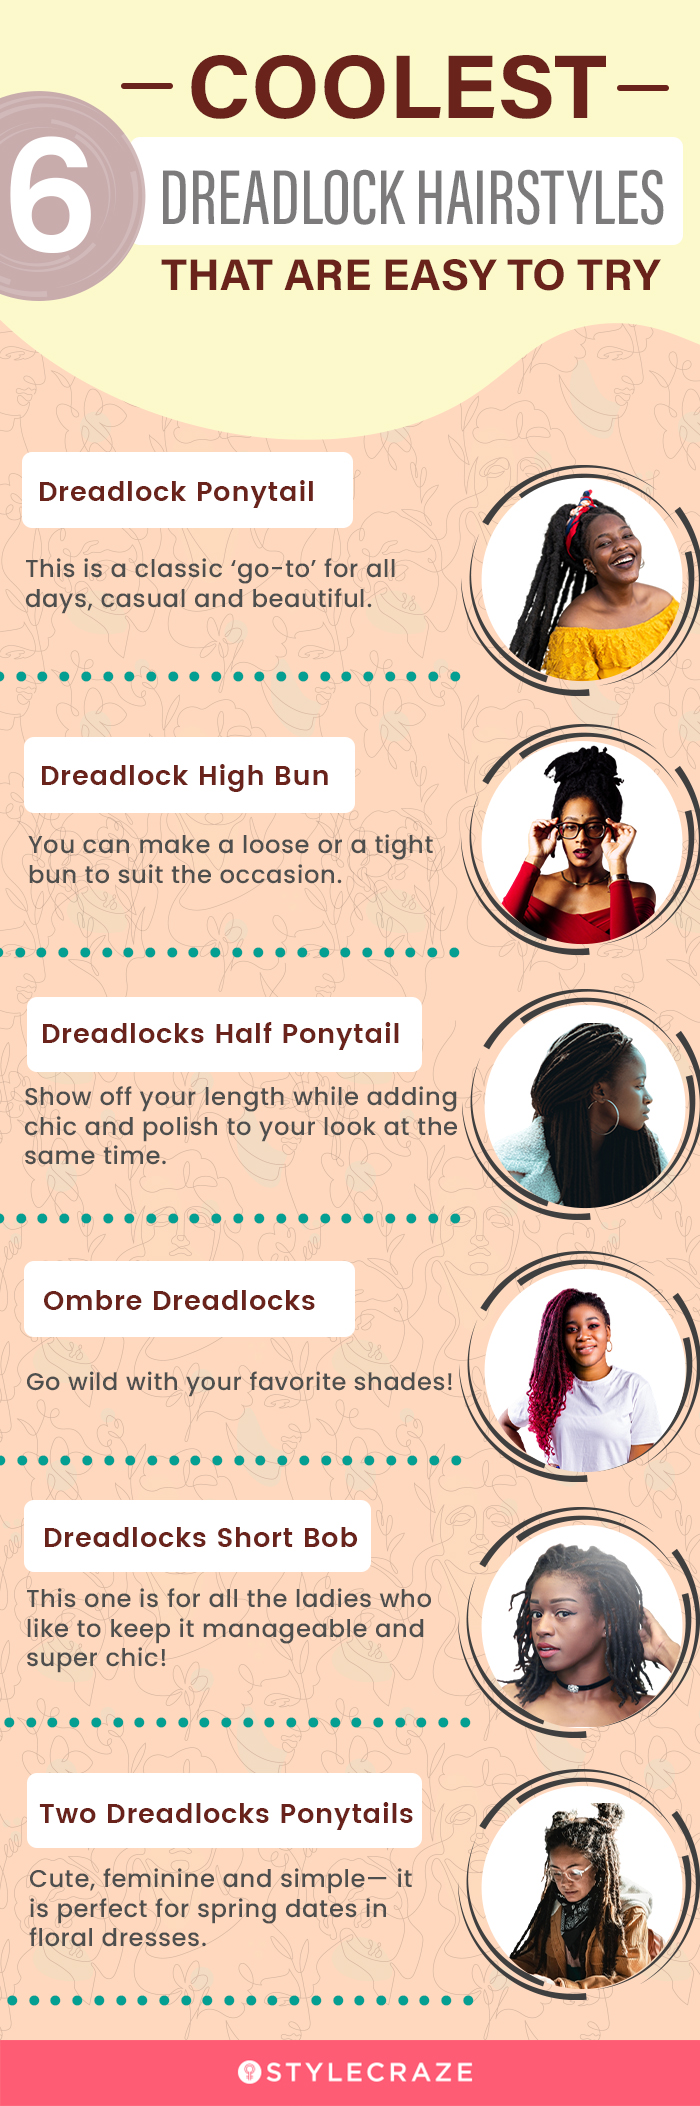 6 coolest dreadlock hairstyles [infographic]